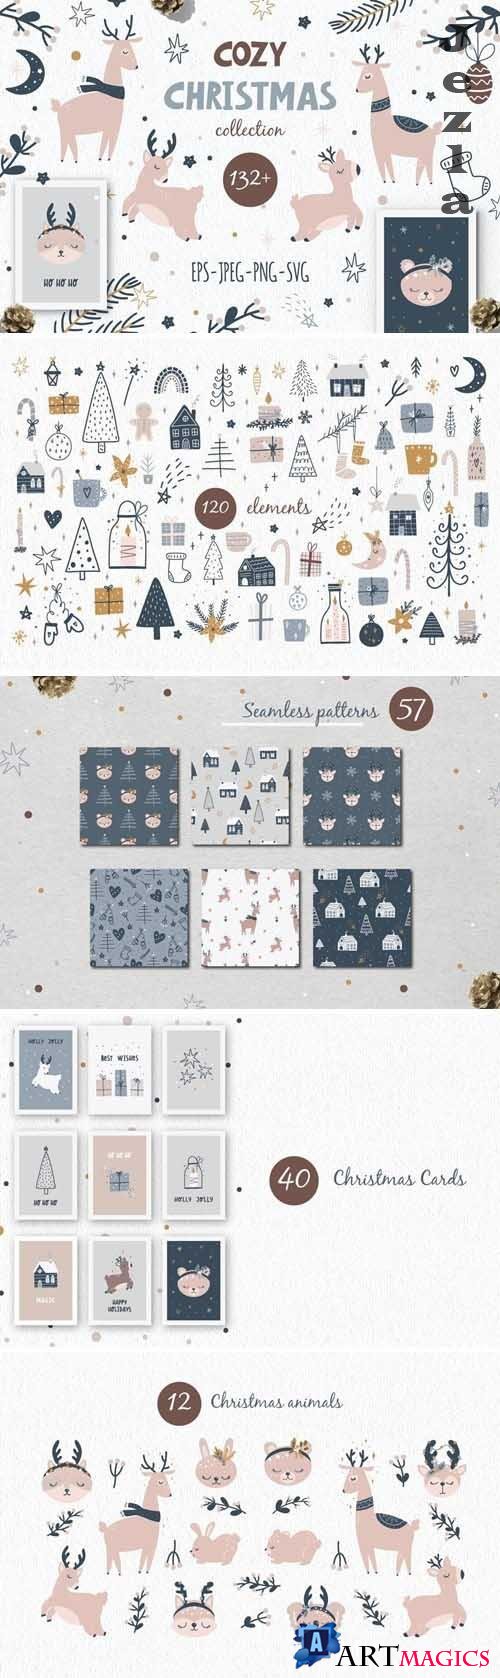 Cozy Christmas collection. Christmas elements